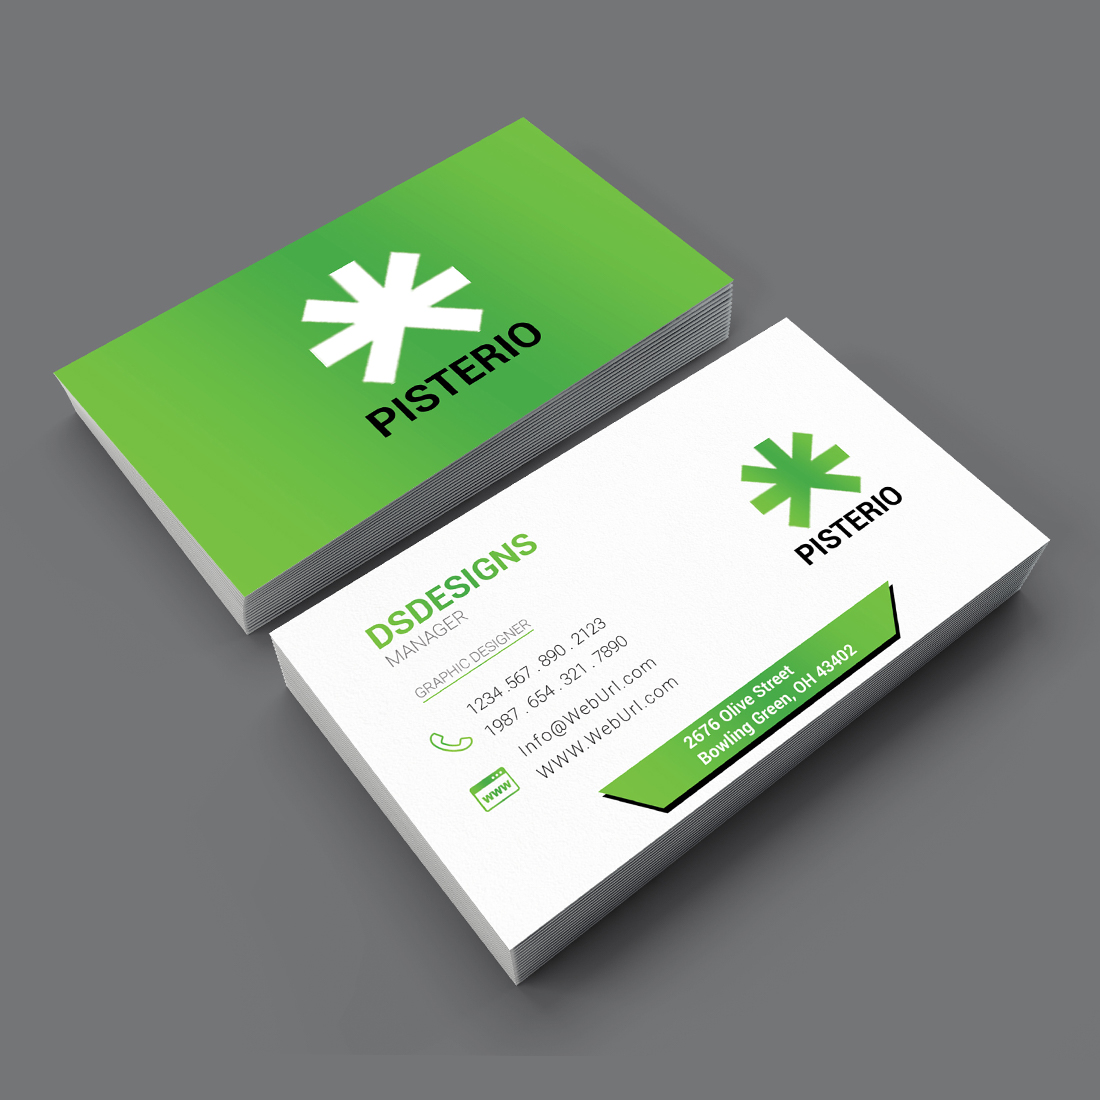 Gradient Business Card Design main cover.